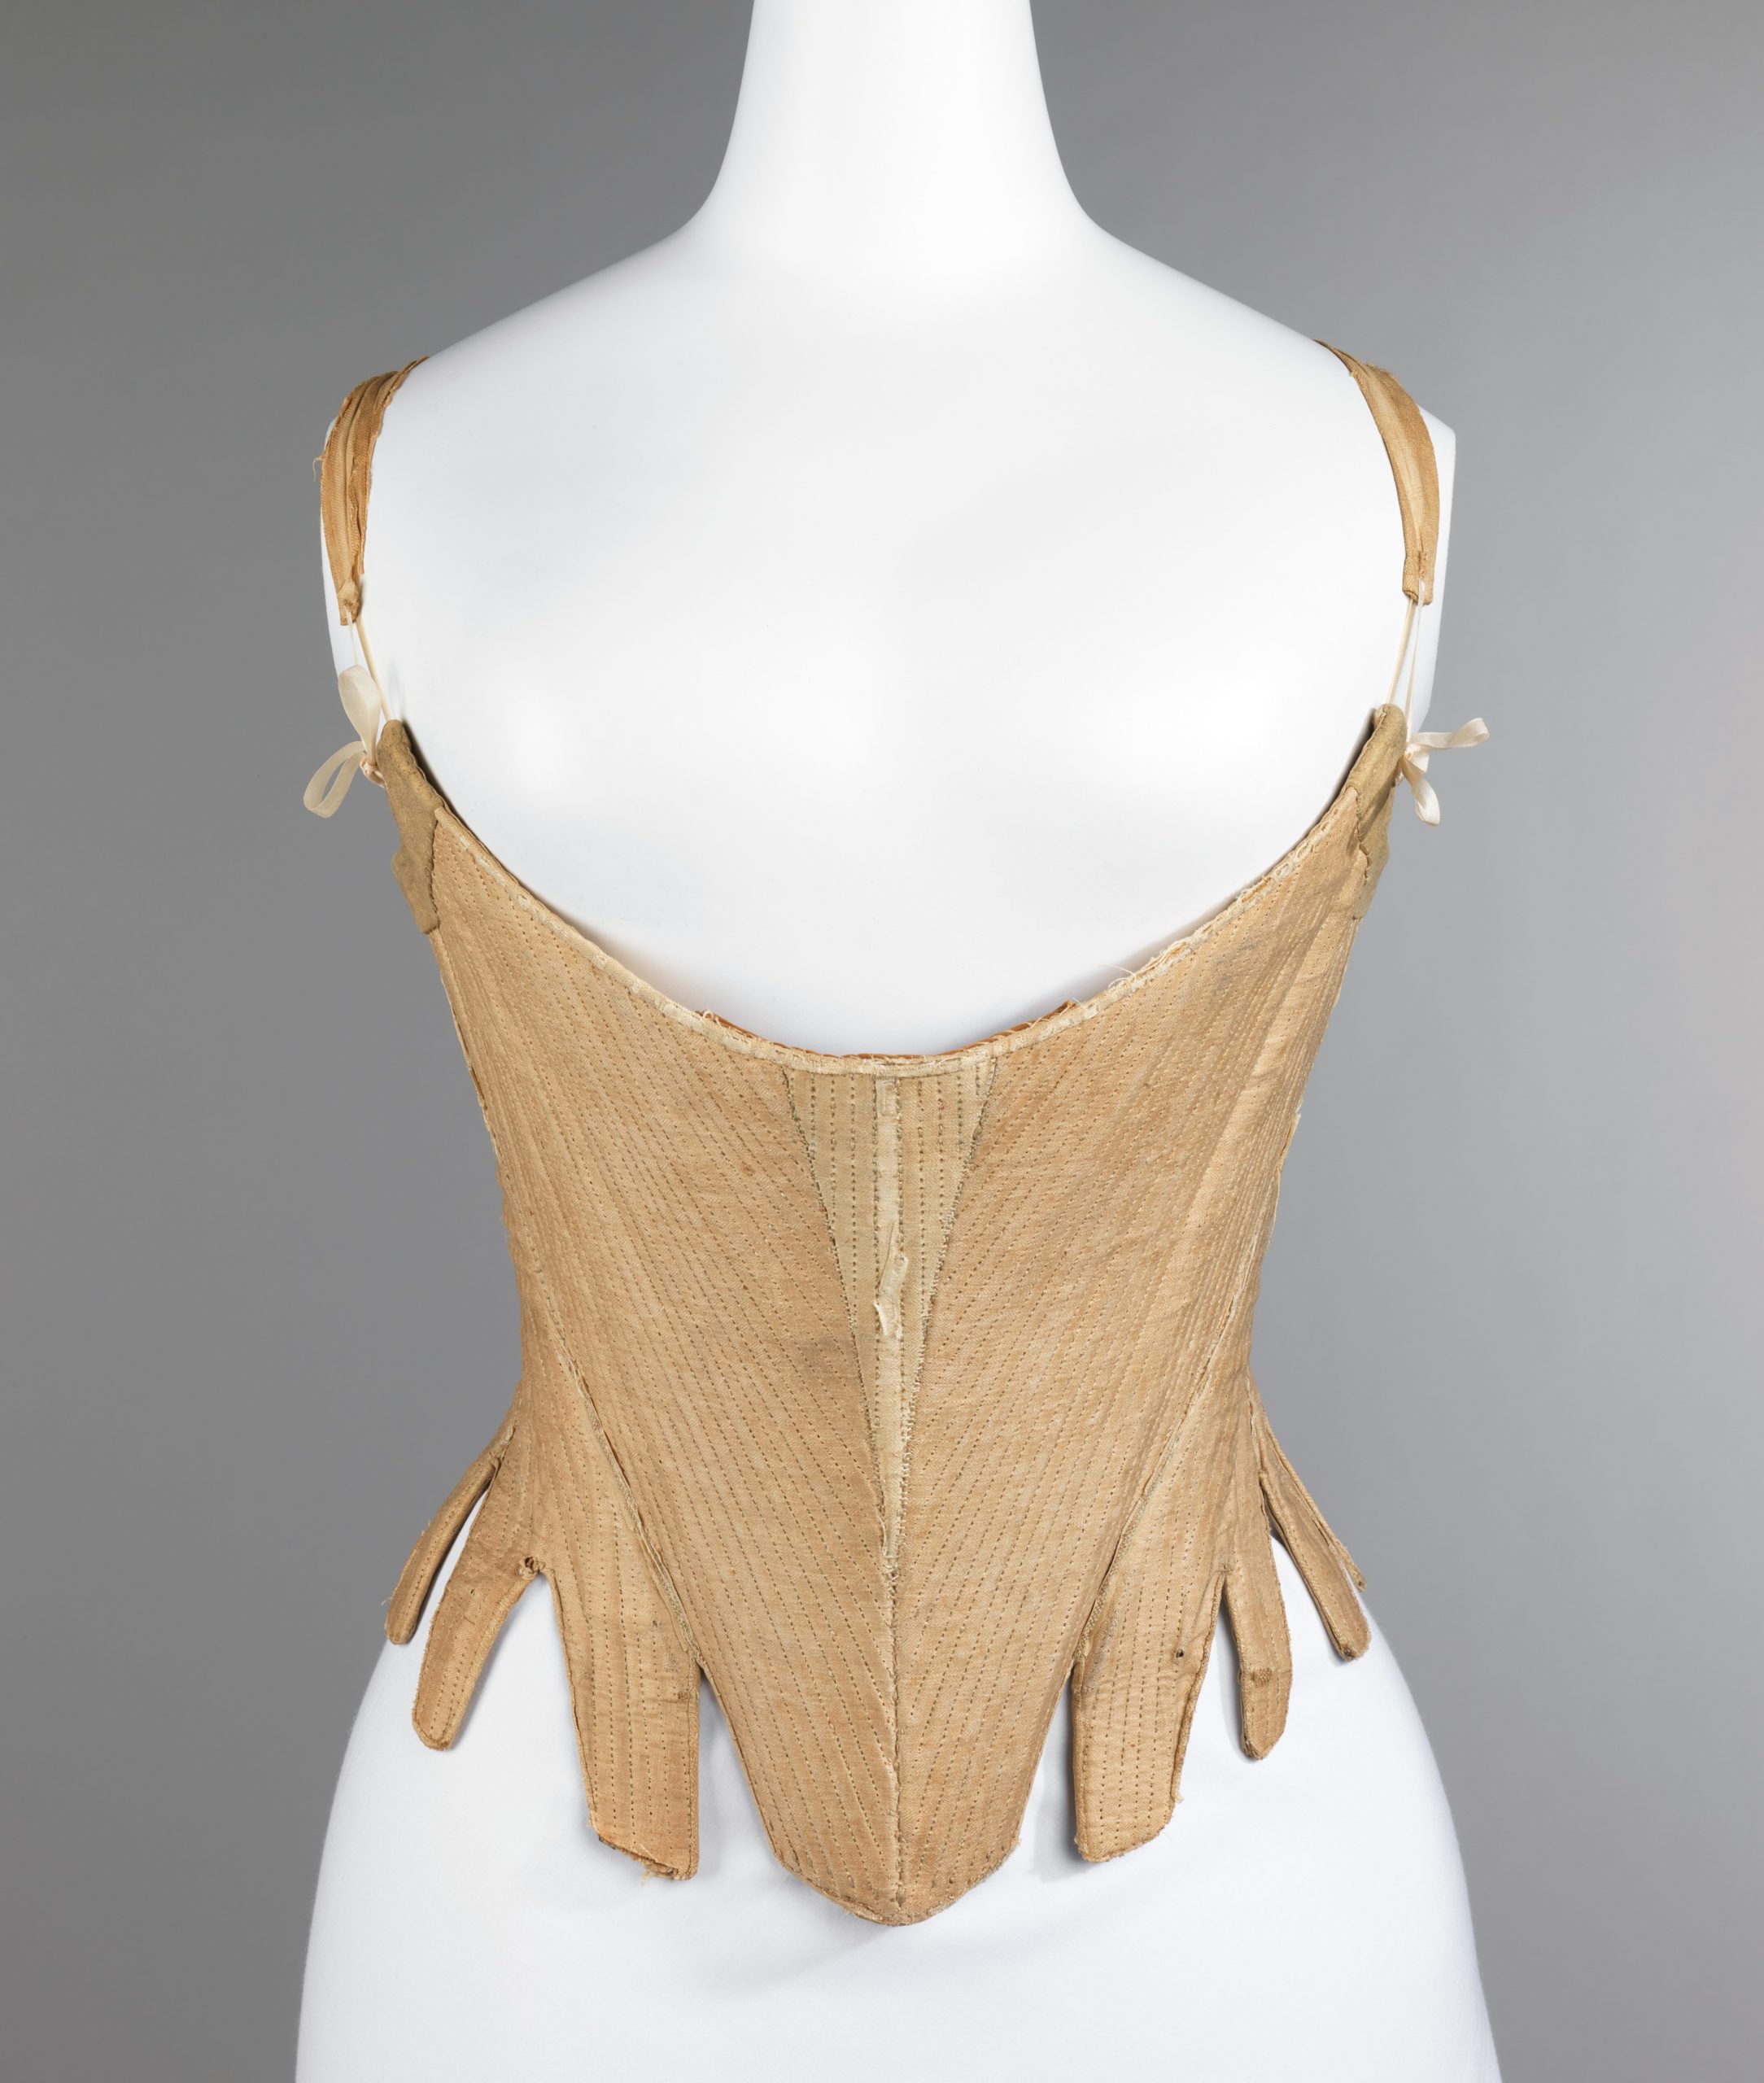 Corset (Stays), 1740–60, American, linen, leather, whalebone, Brooklyn  Museum Costume Collection at The Metropolitan Museum of Art, Gift of the  Jason and Peggy Westerfield Collection, 1969, front 2009.300.3330a–d - The  Dreamstress